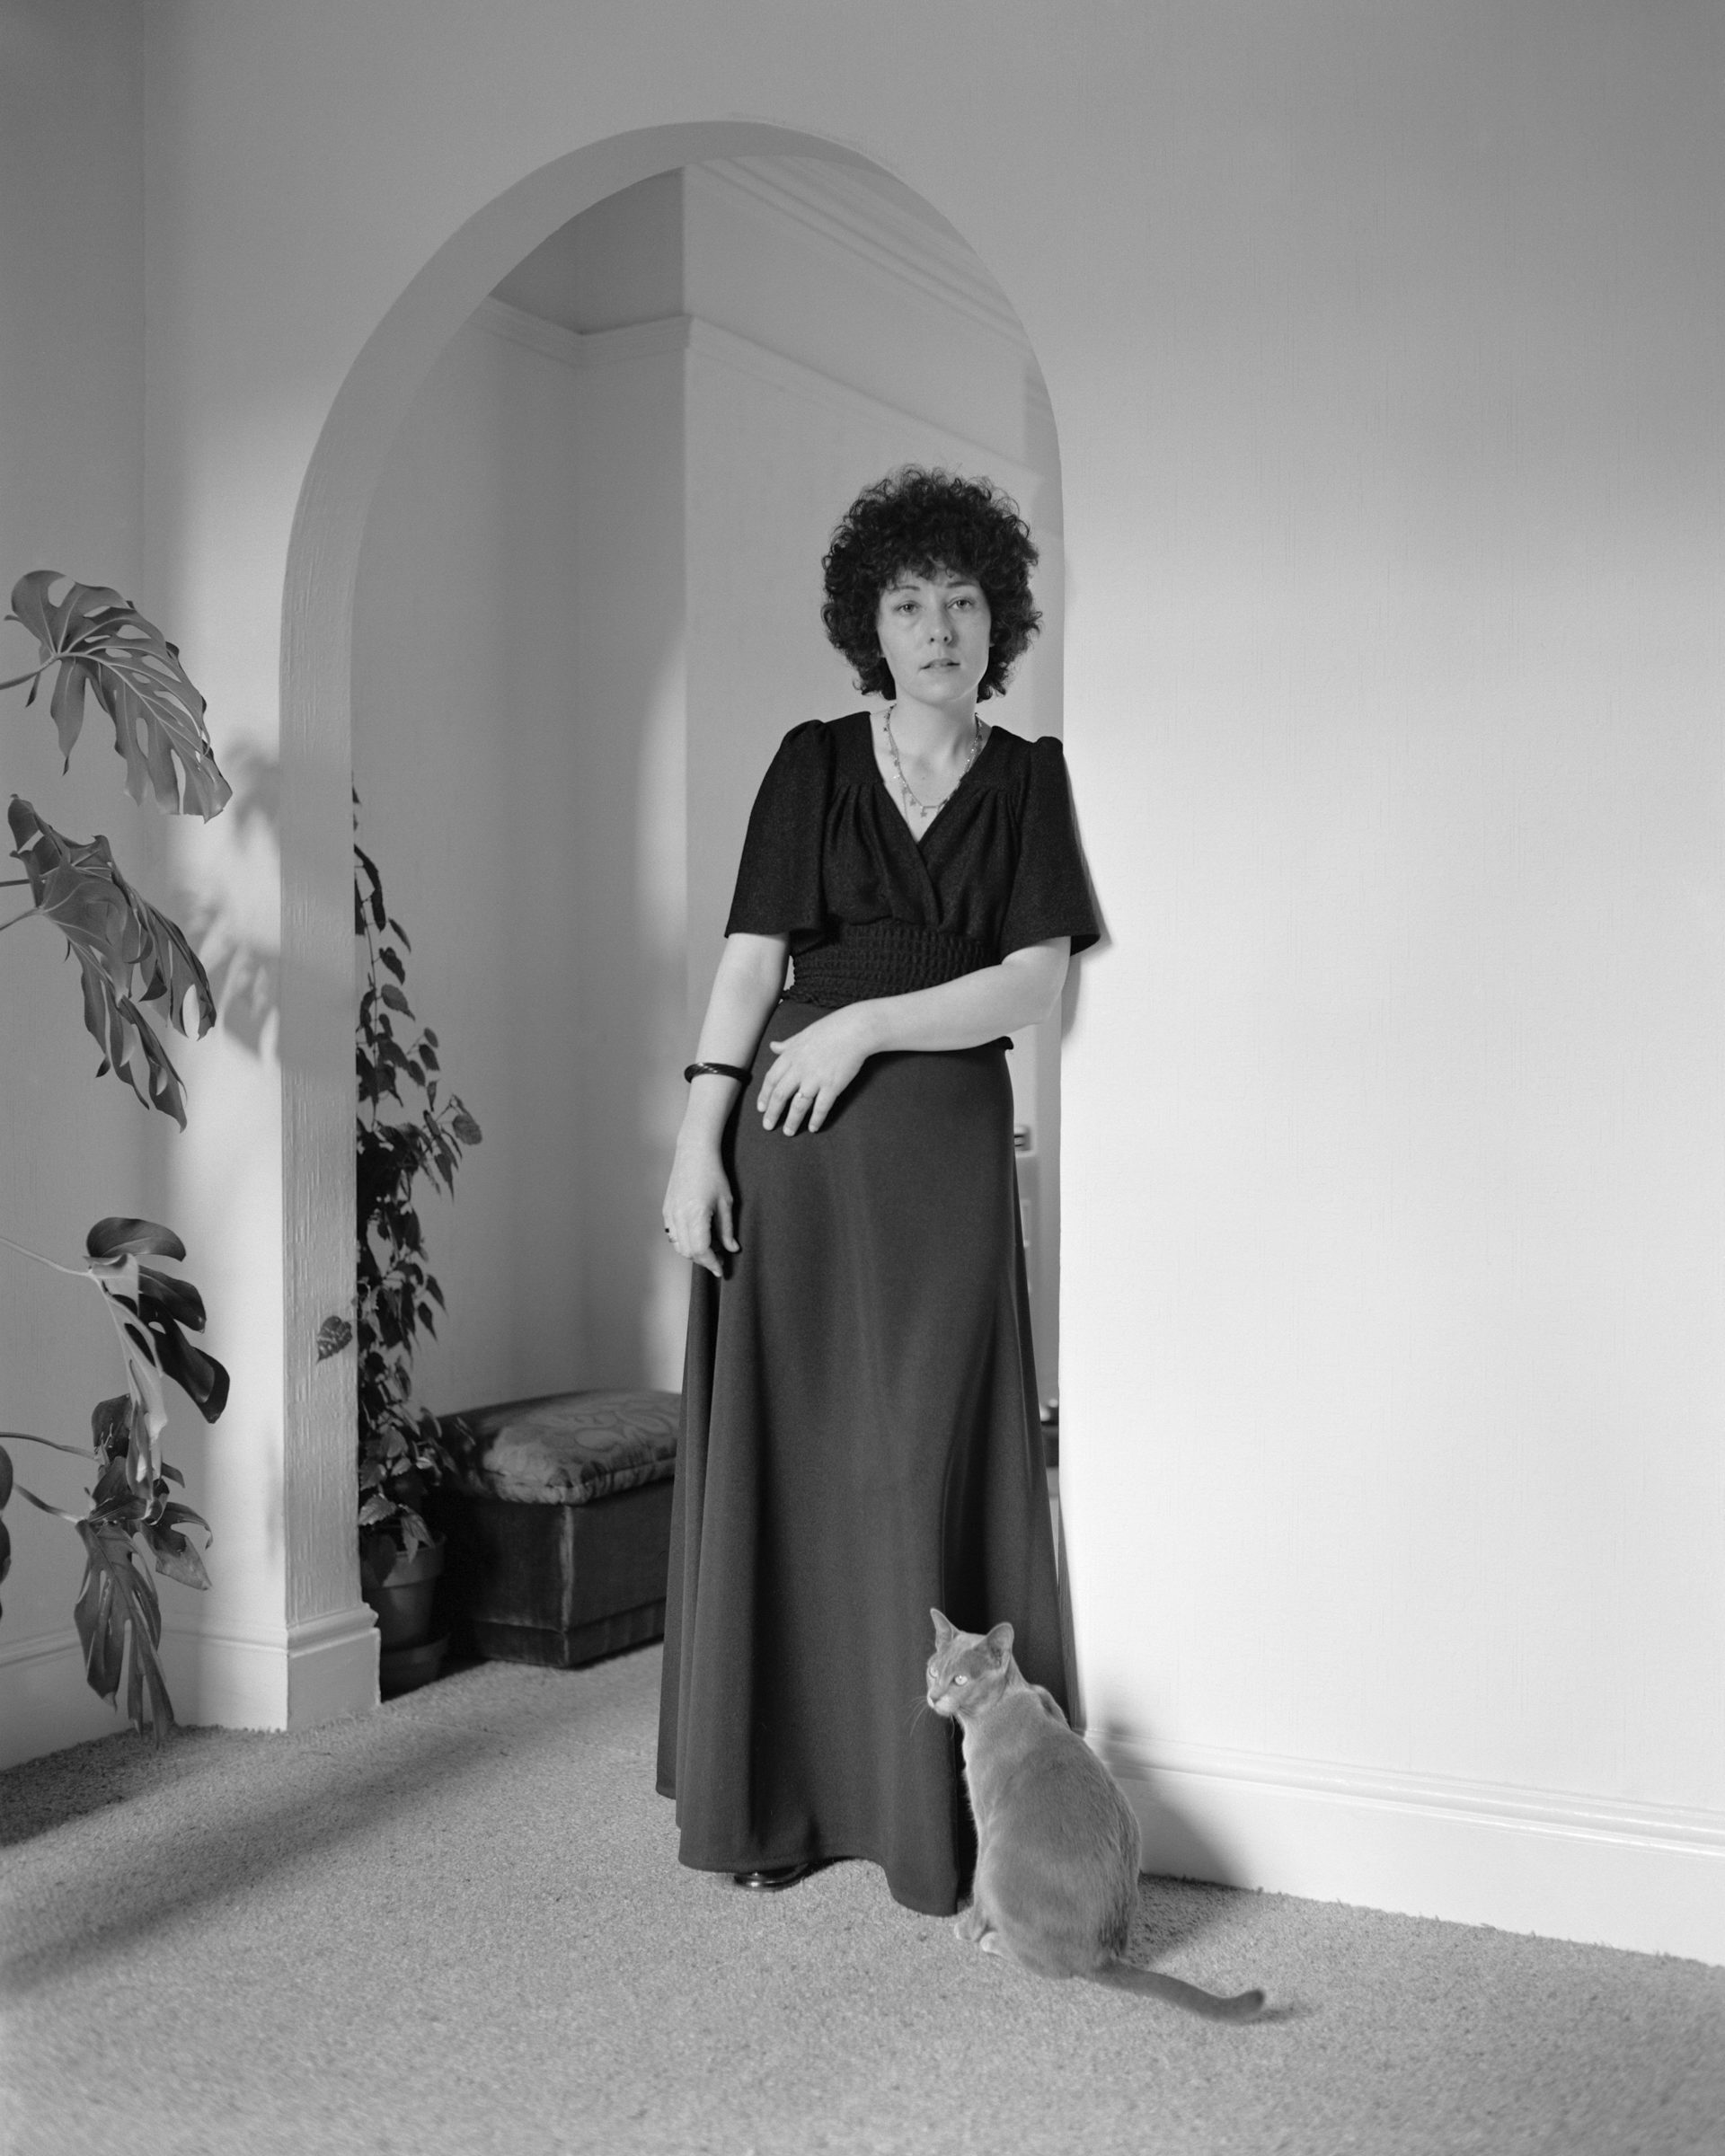 Black and white photograph of a woman in a long dress next to a cat, which features in Life As It Is by John Myers